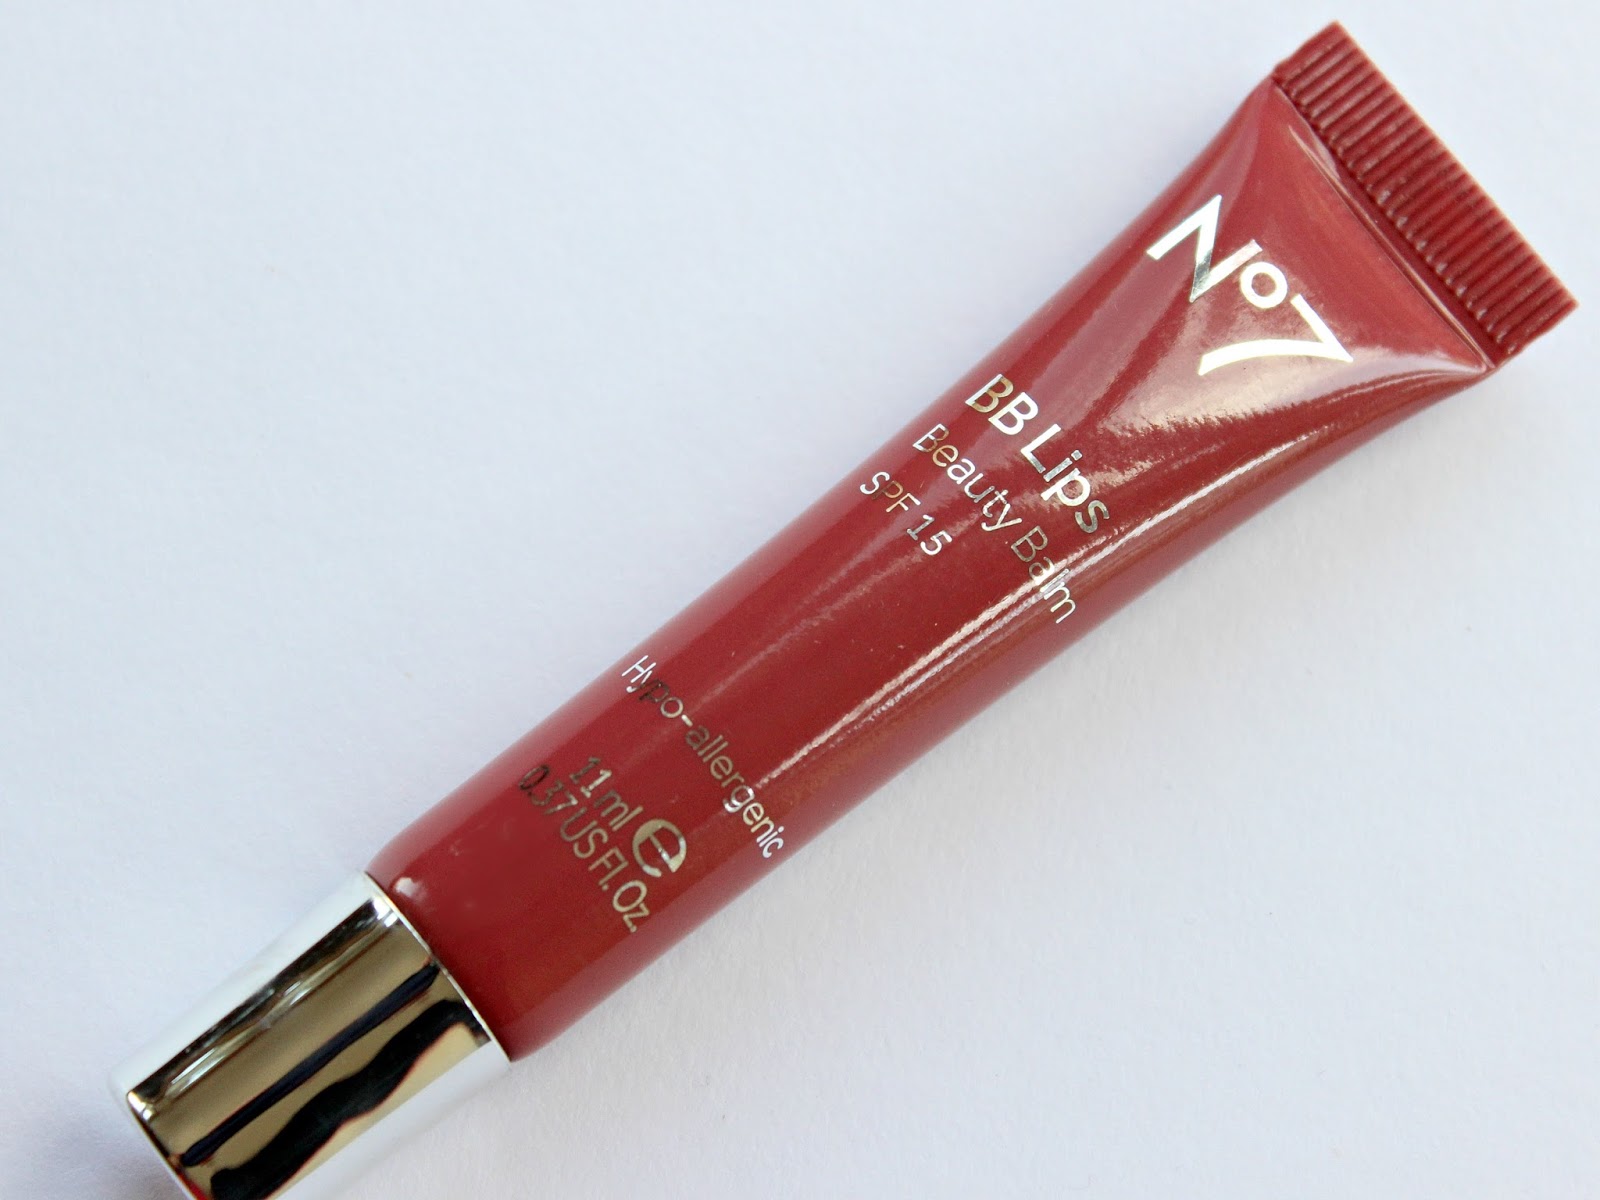 A picture of the No 7 BB Lips in Blush Pink